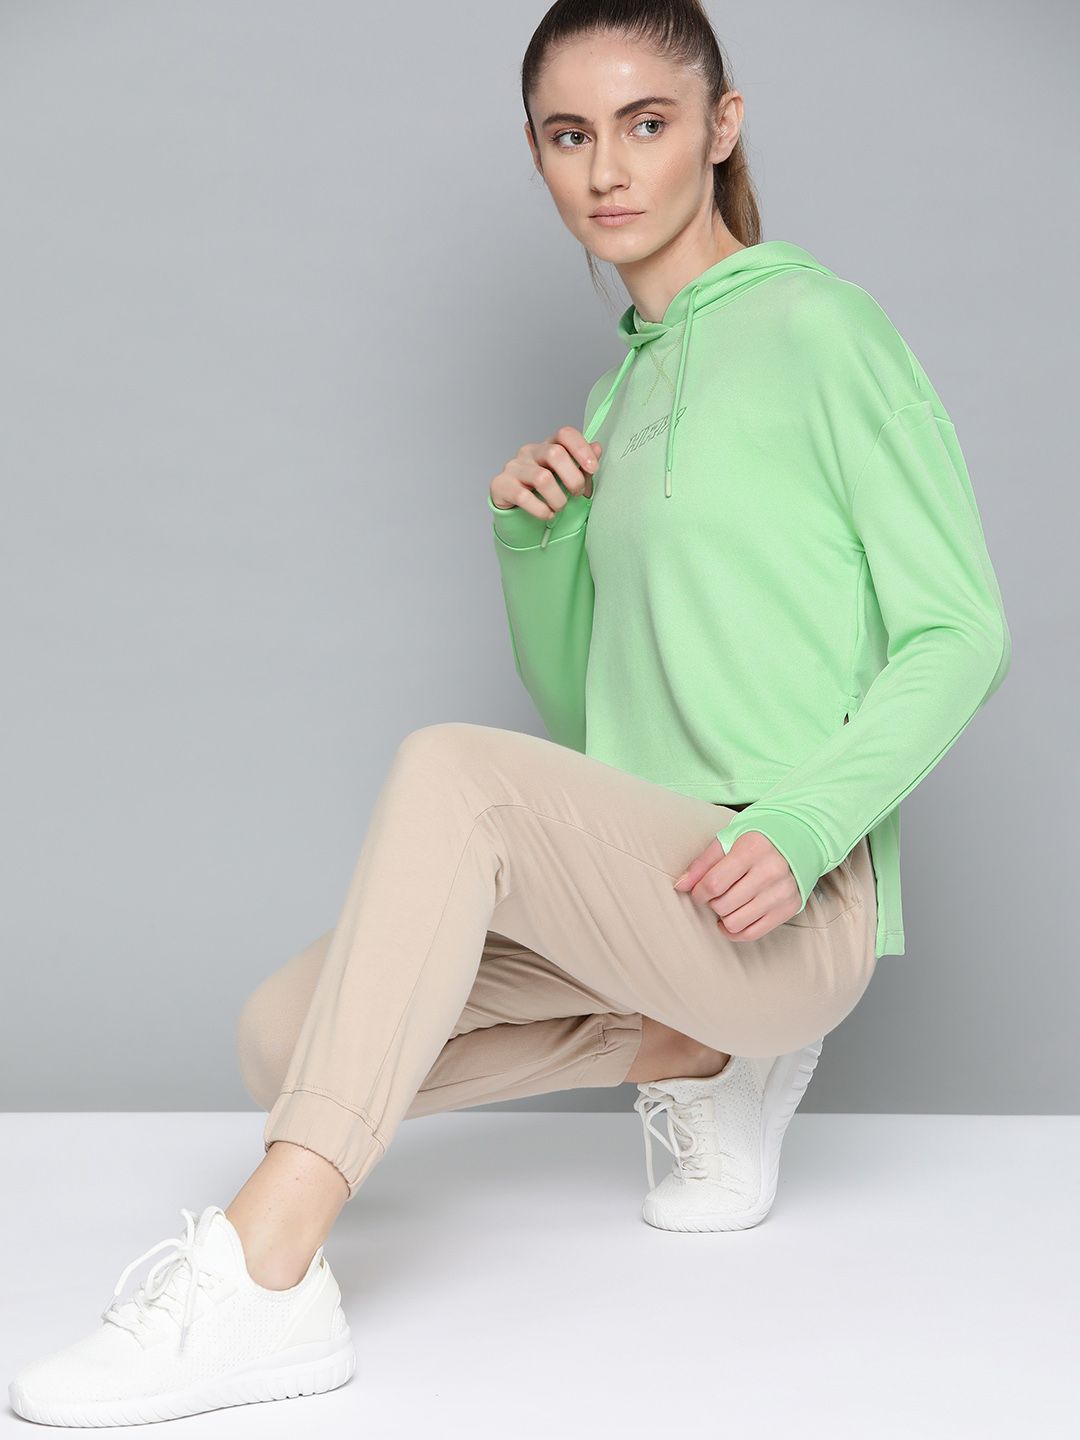 HRX By Hrithik Roshan Lifestyle Women Neo Mint Rapid-Dry Solid Sweatshirt Price in India